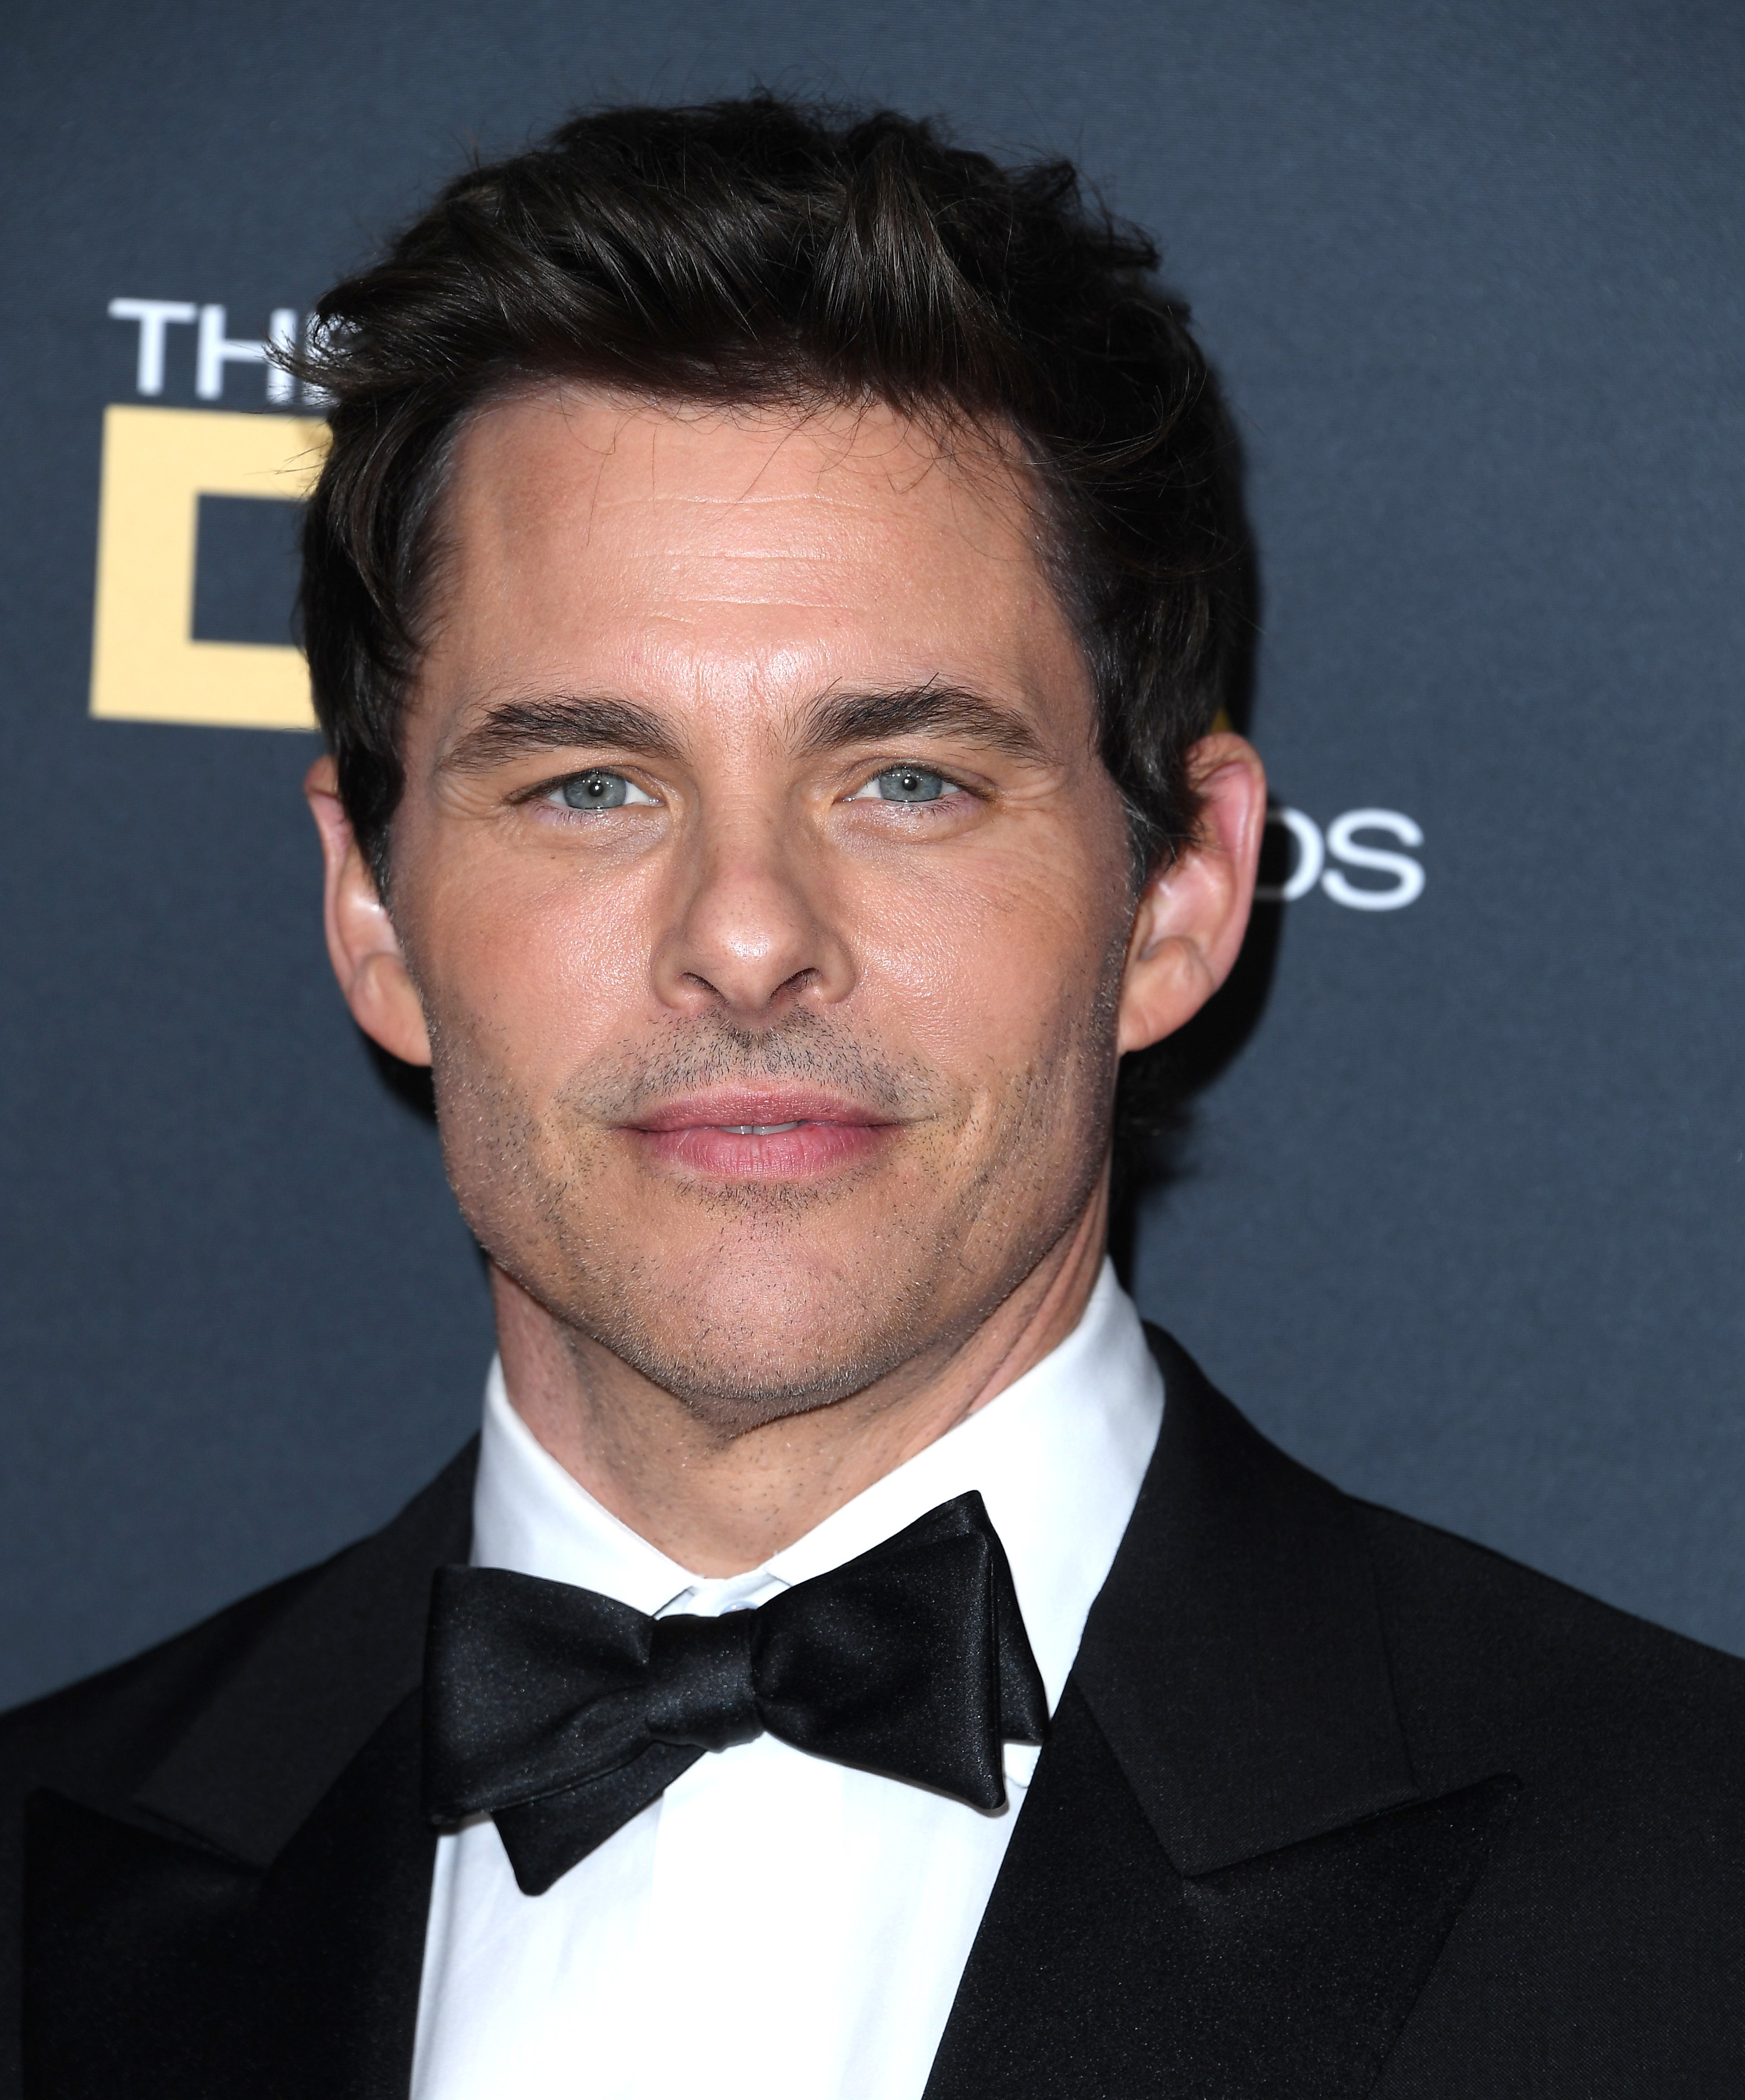 James Marsden arrives at the 75th Directors Guild Of America Awards at The Beverly Hilton